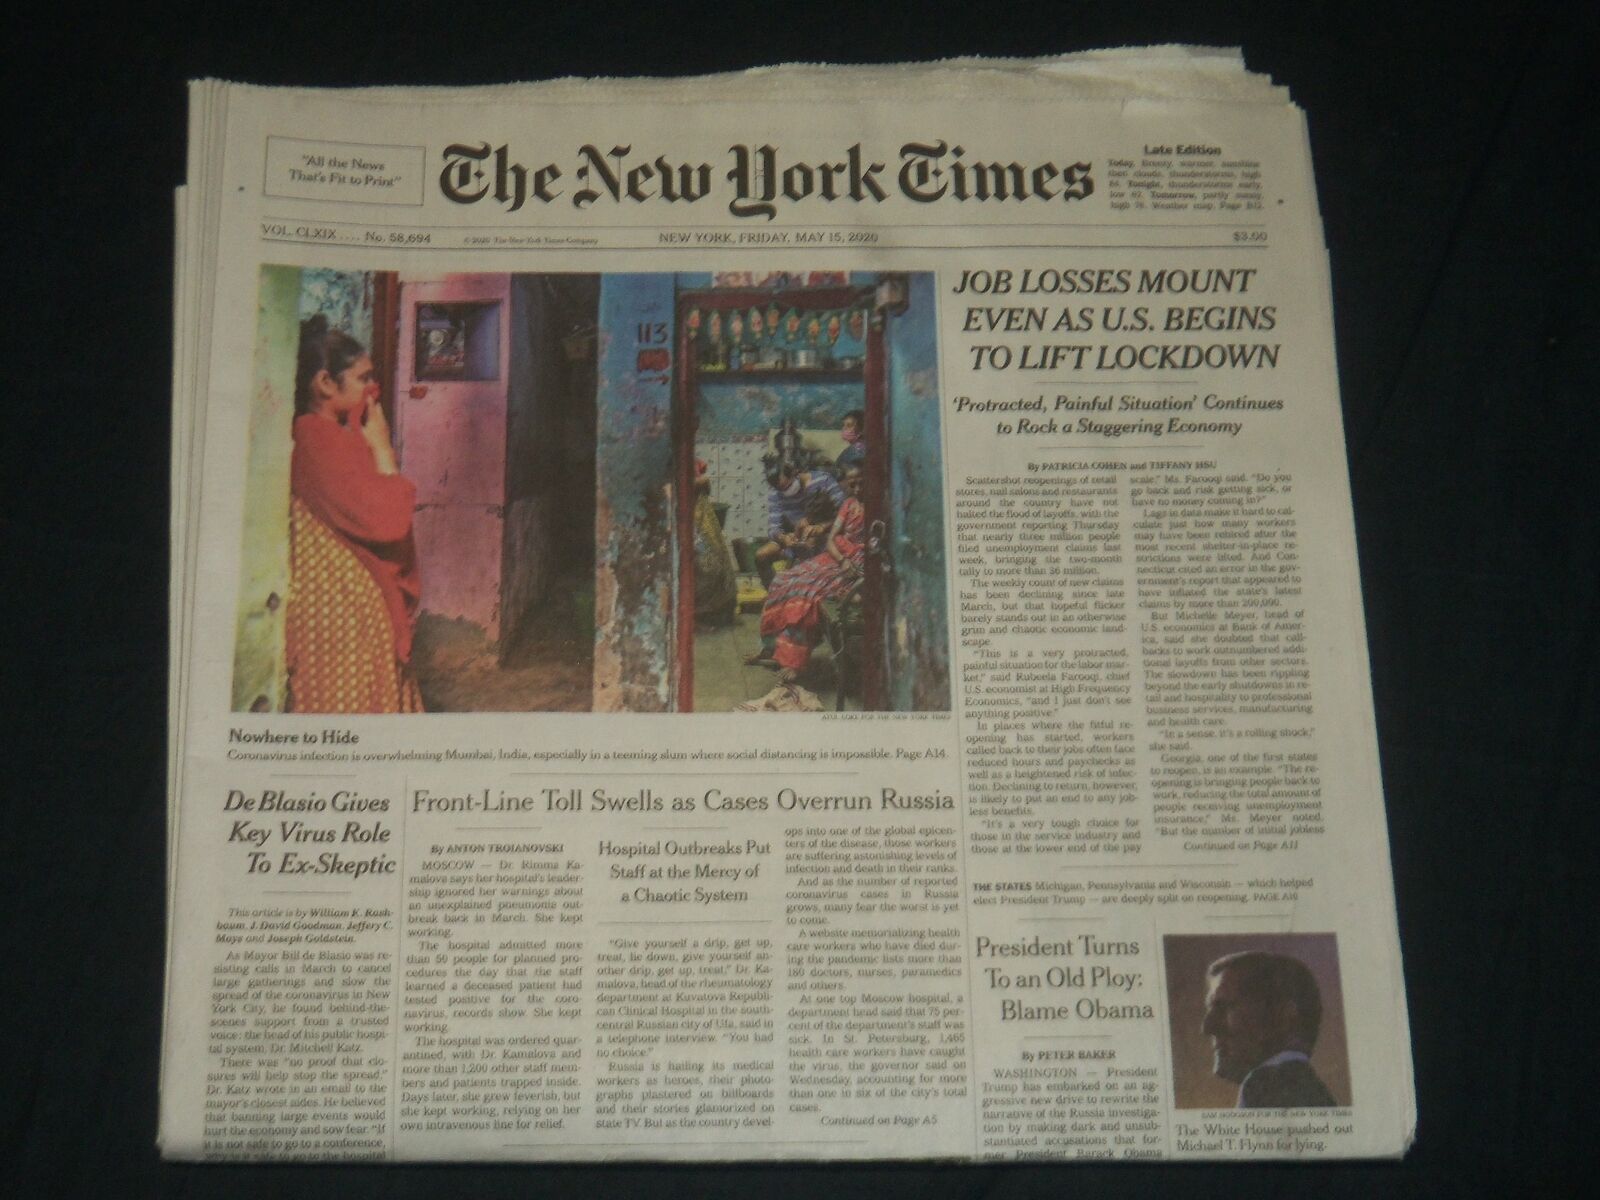 2020 MAY 15 NEW YORK TIMES JOB LOSSES MOUNT EVEN AS U. S BEGINS TO LIFT LOCKDOWN